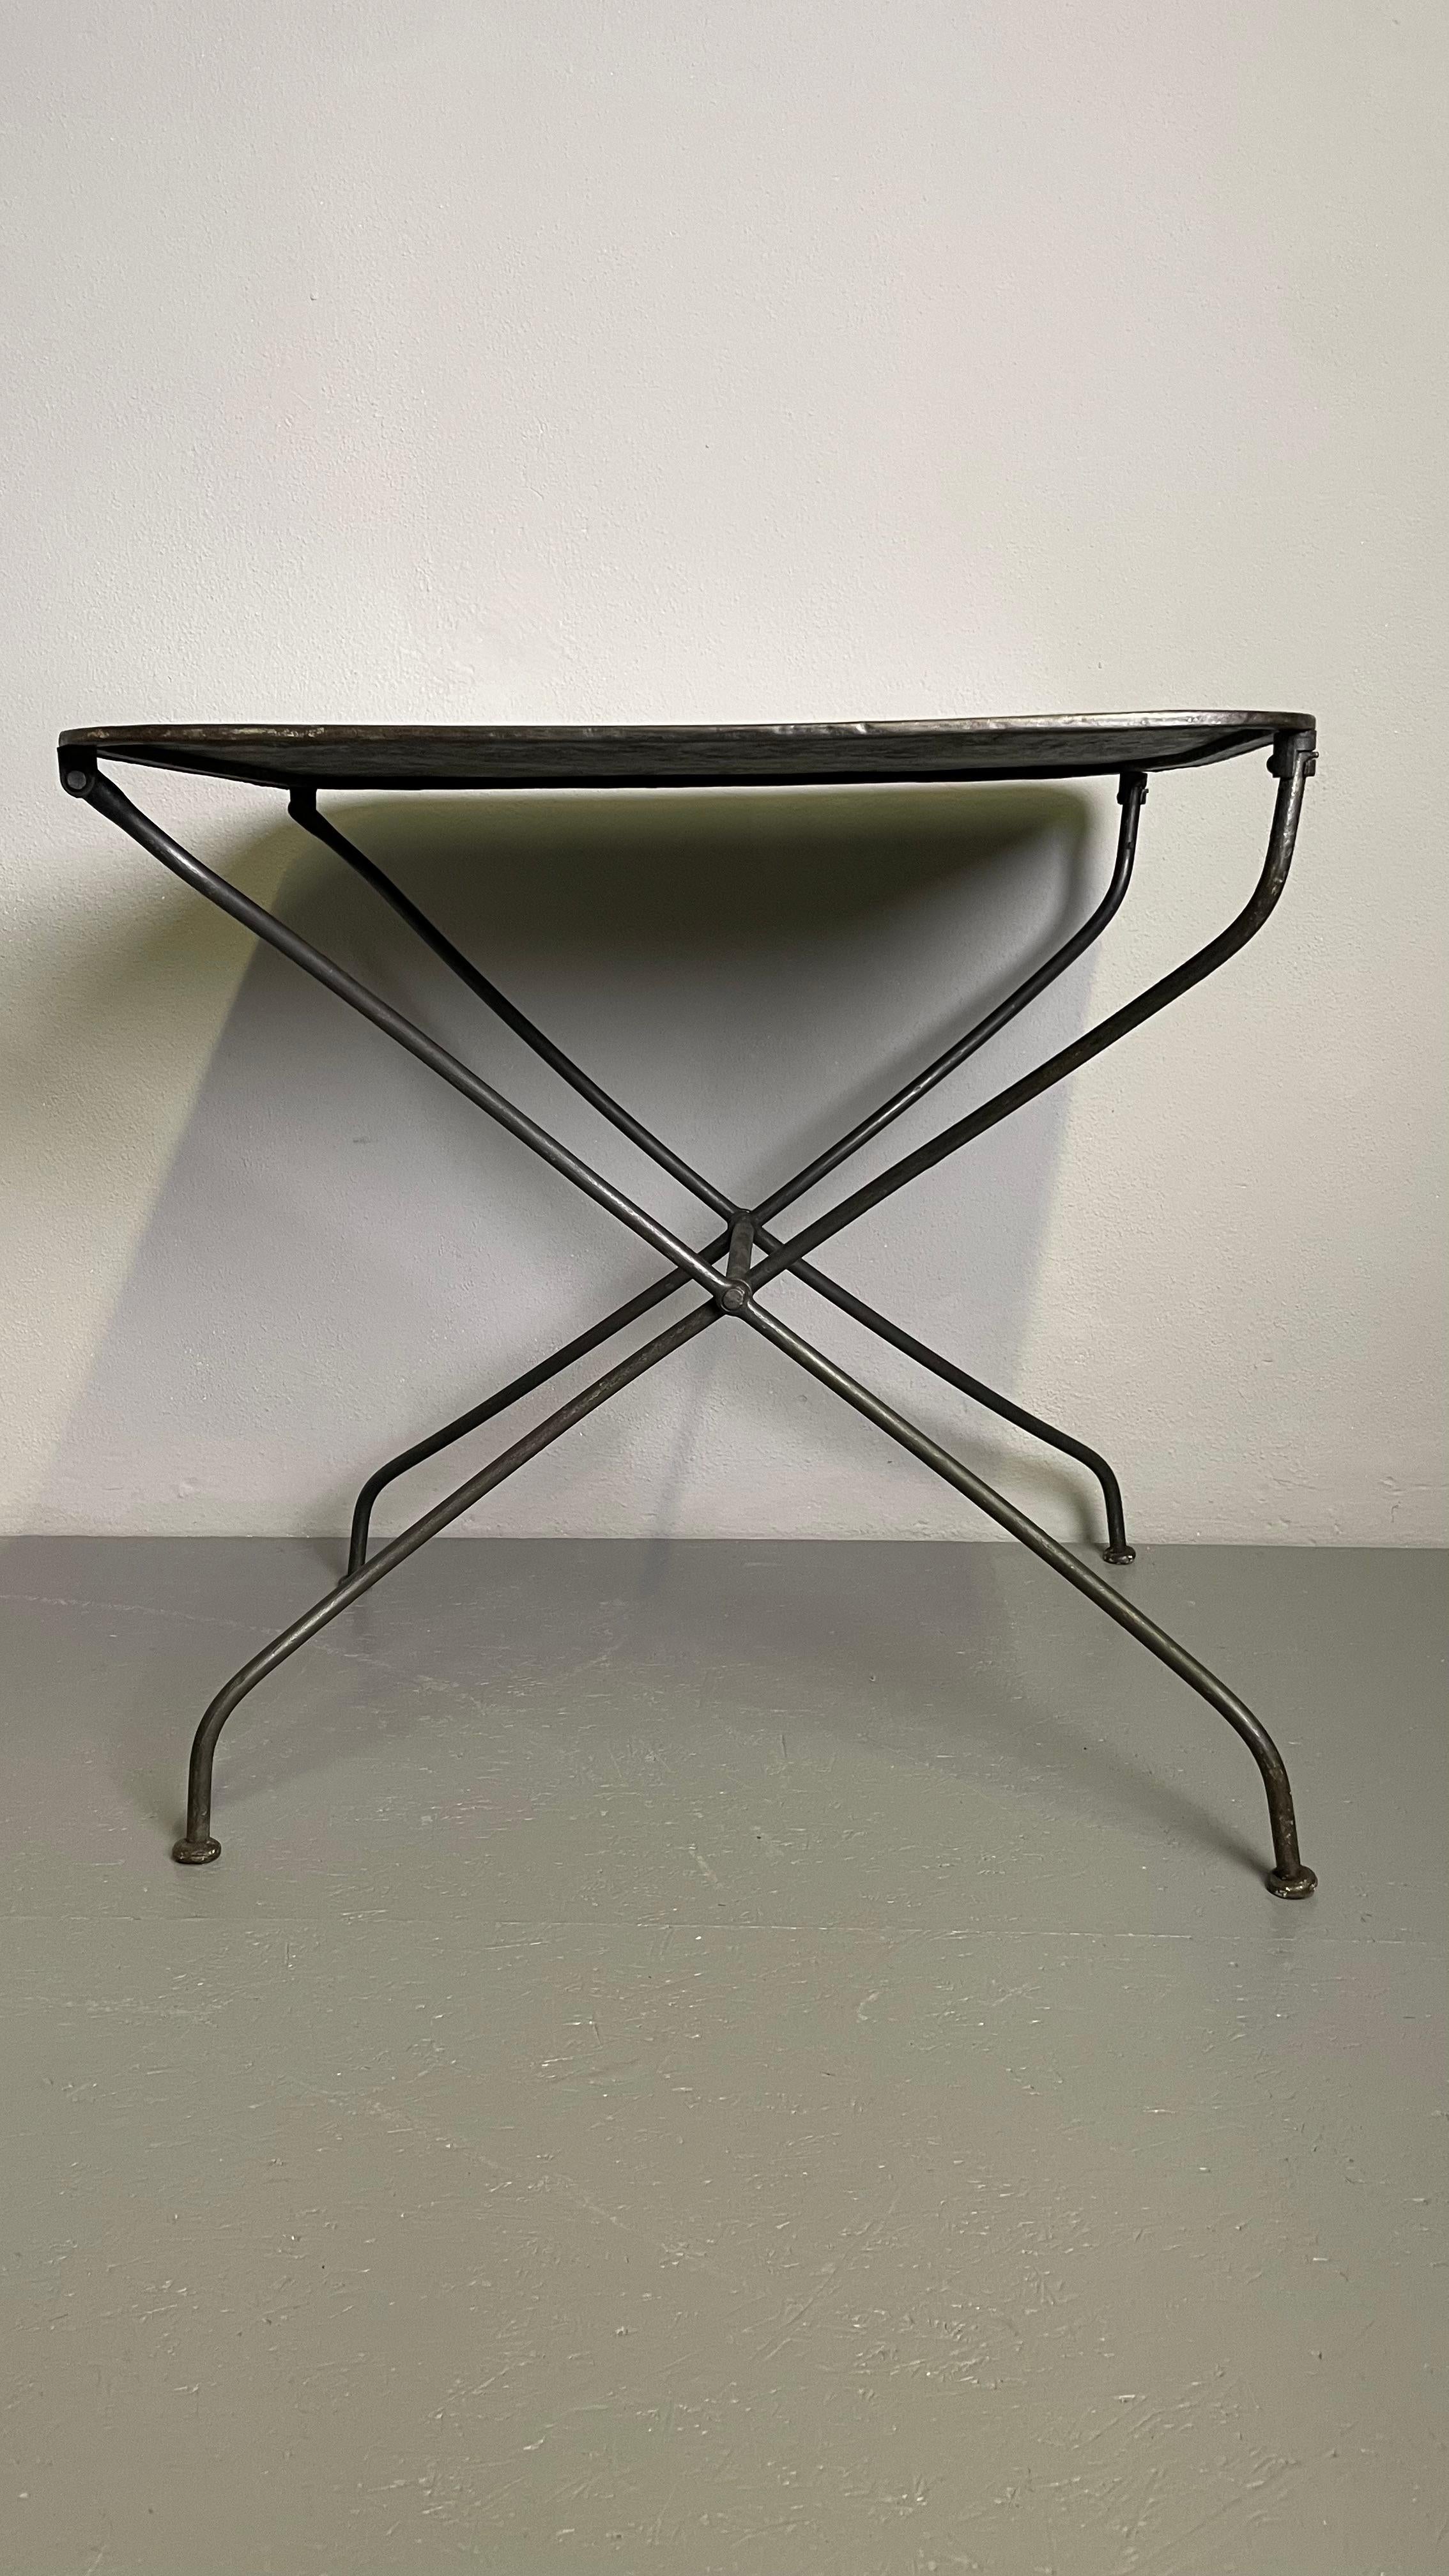 This table folds together